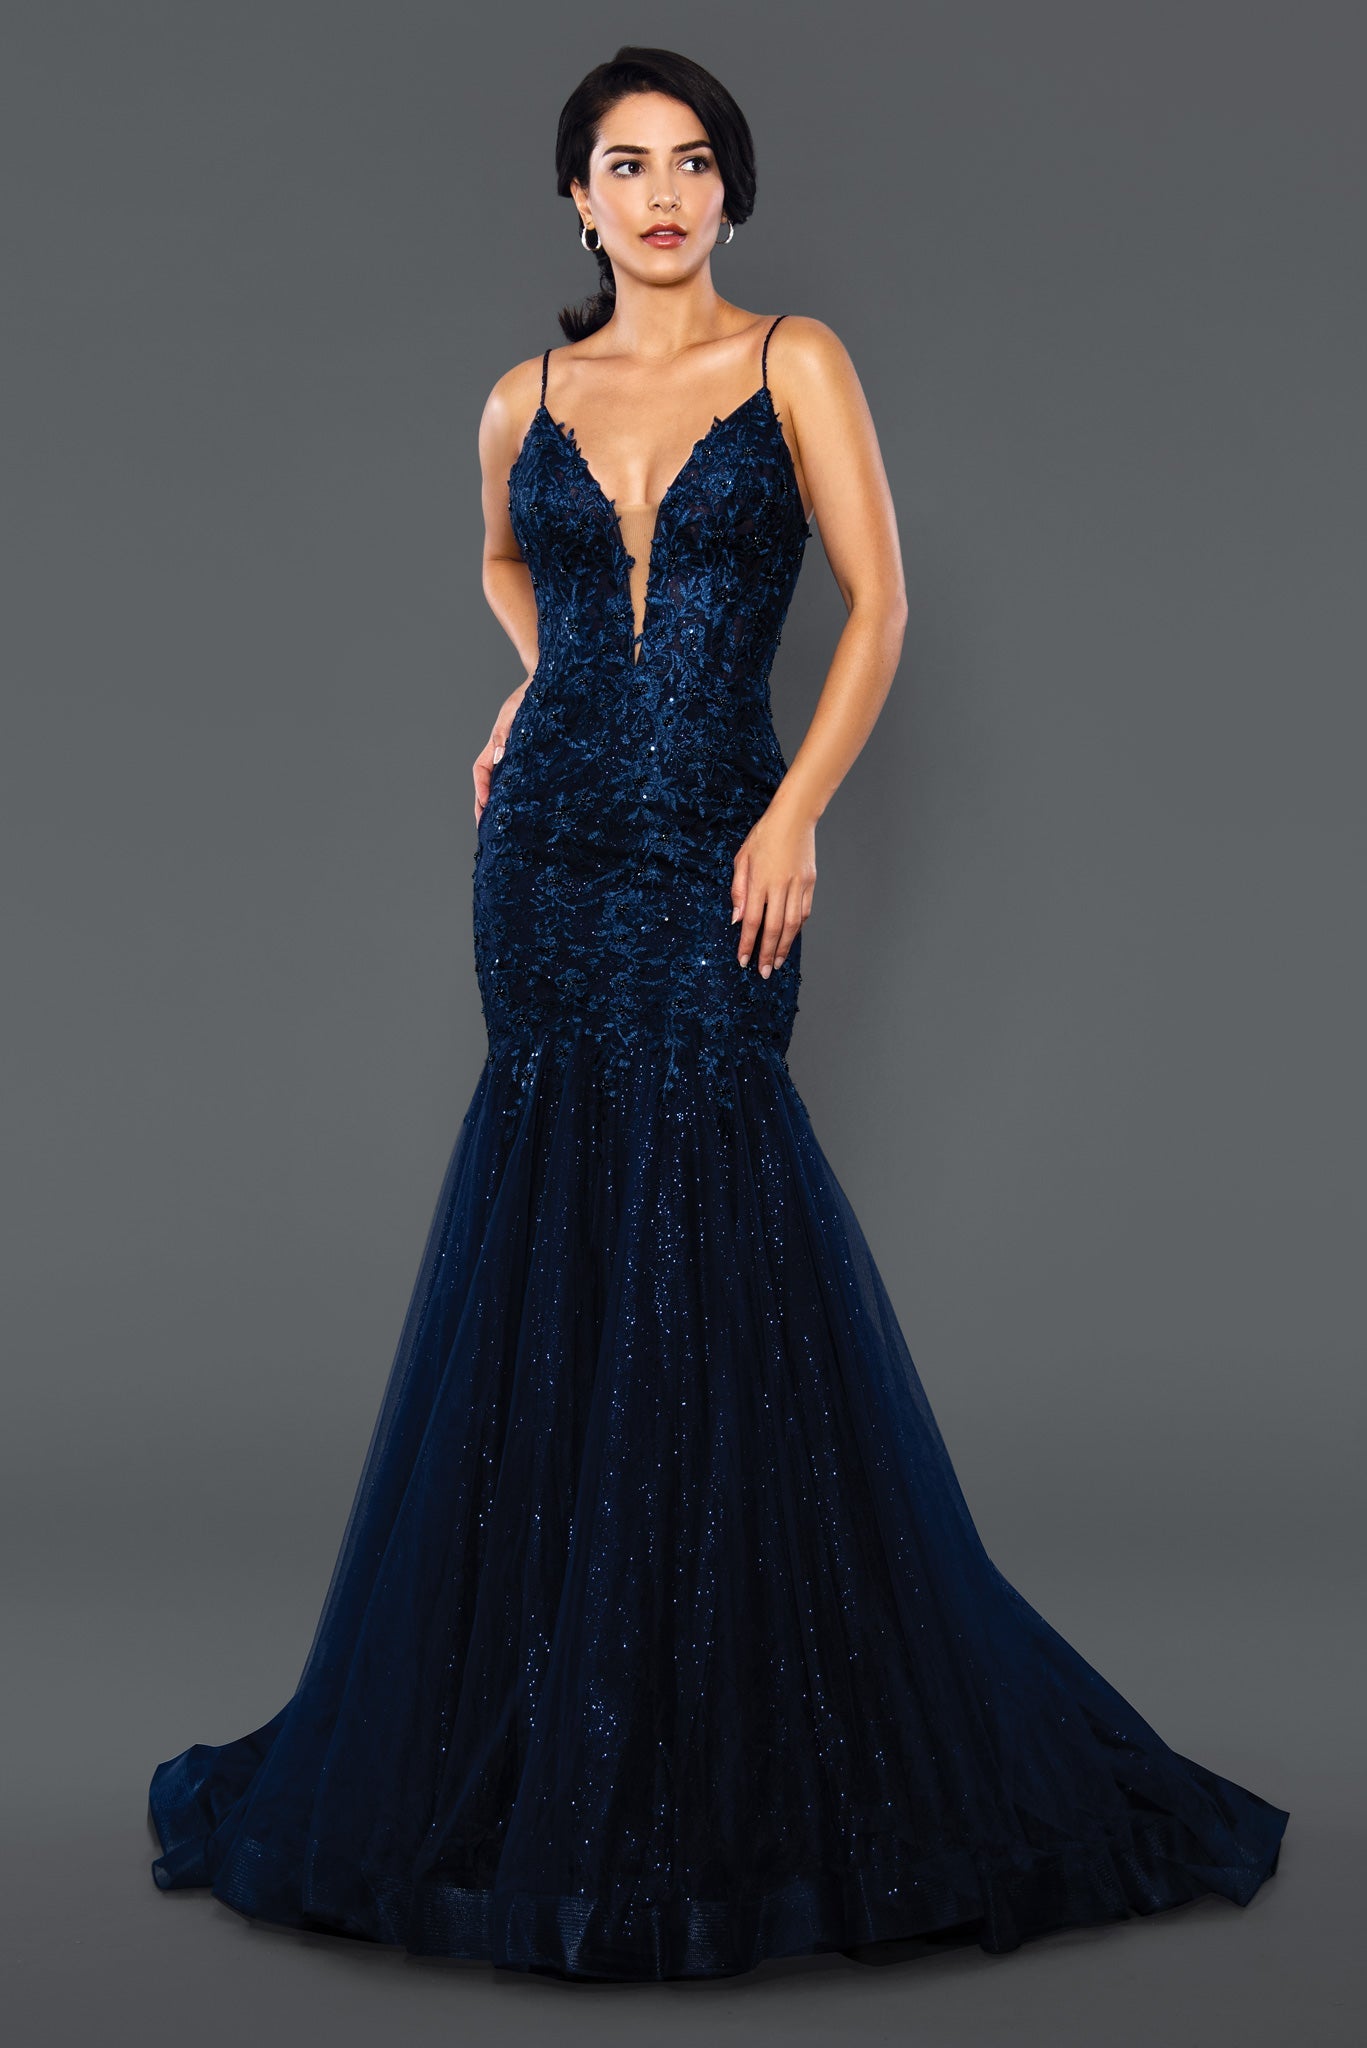 Stella Couture 22043 Long Shimmer Mermaid Prom Dress Pageant Gown Wedding Dress Bridal Gown  Available Size: 4-20  Available Color: Navy, Off White